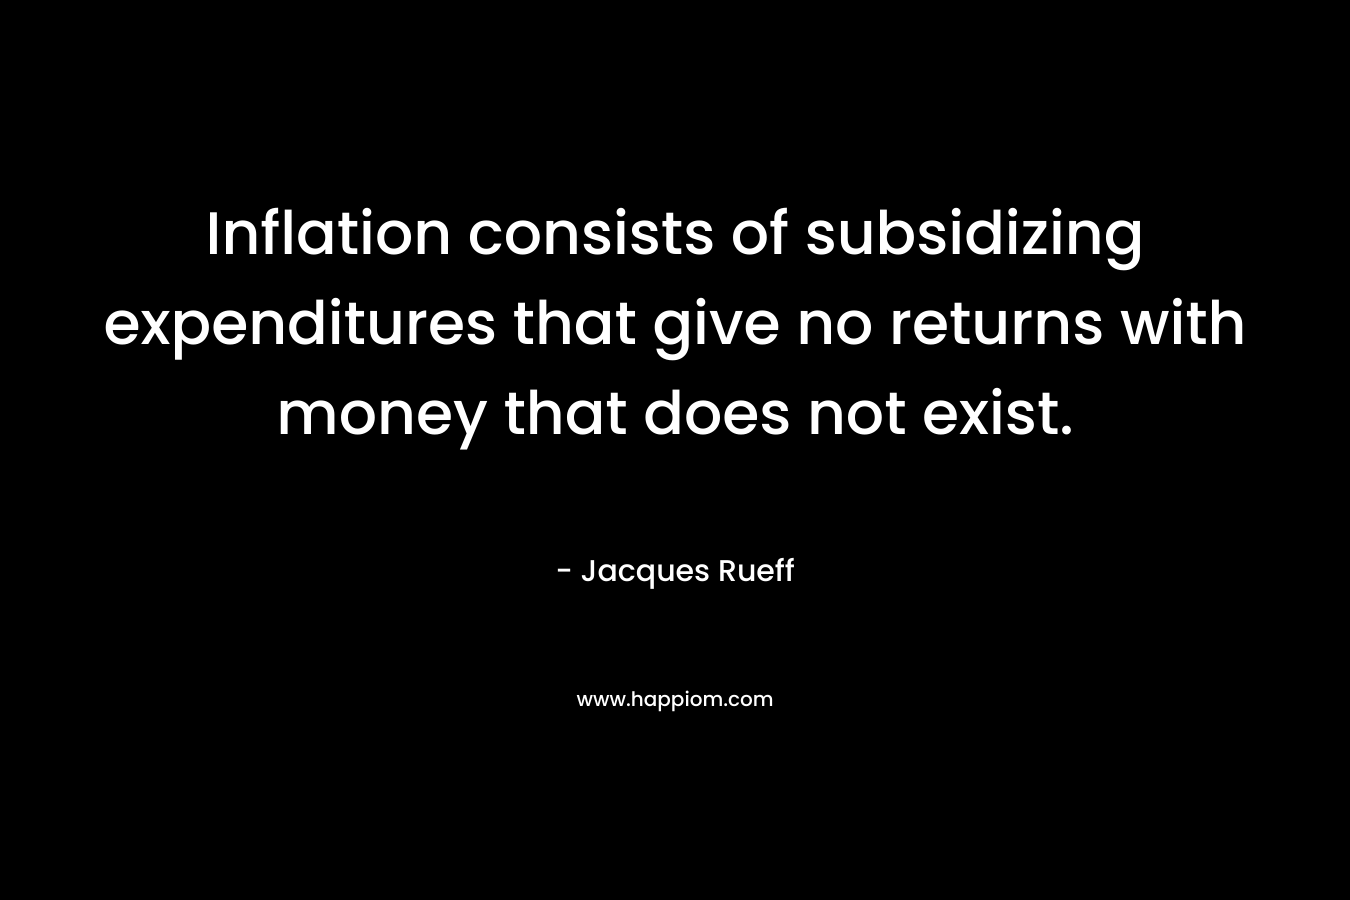 Inflation consists of subsidizing expenditures that give no returns with money that does not exist. – Jacques Rueff